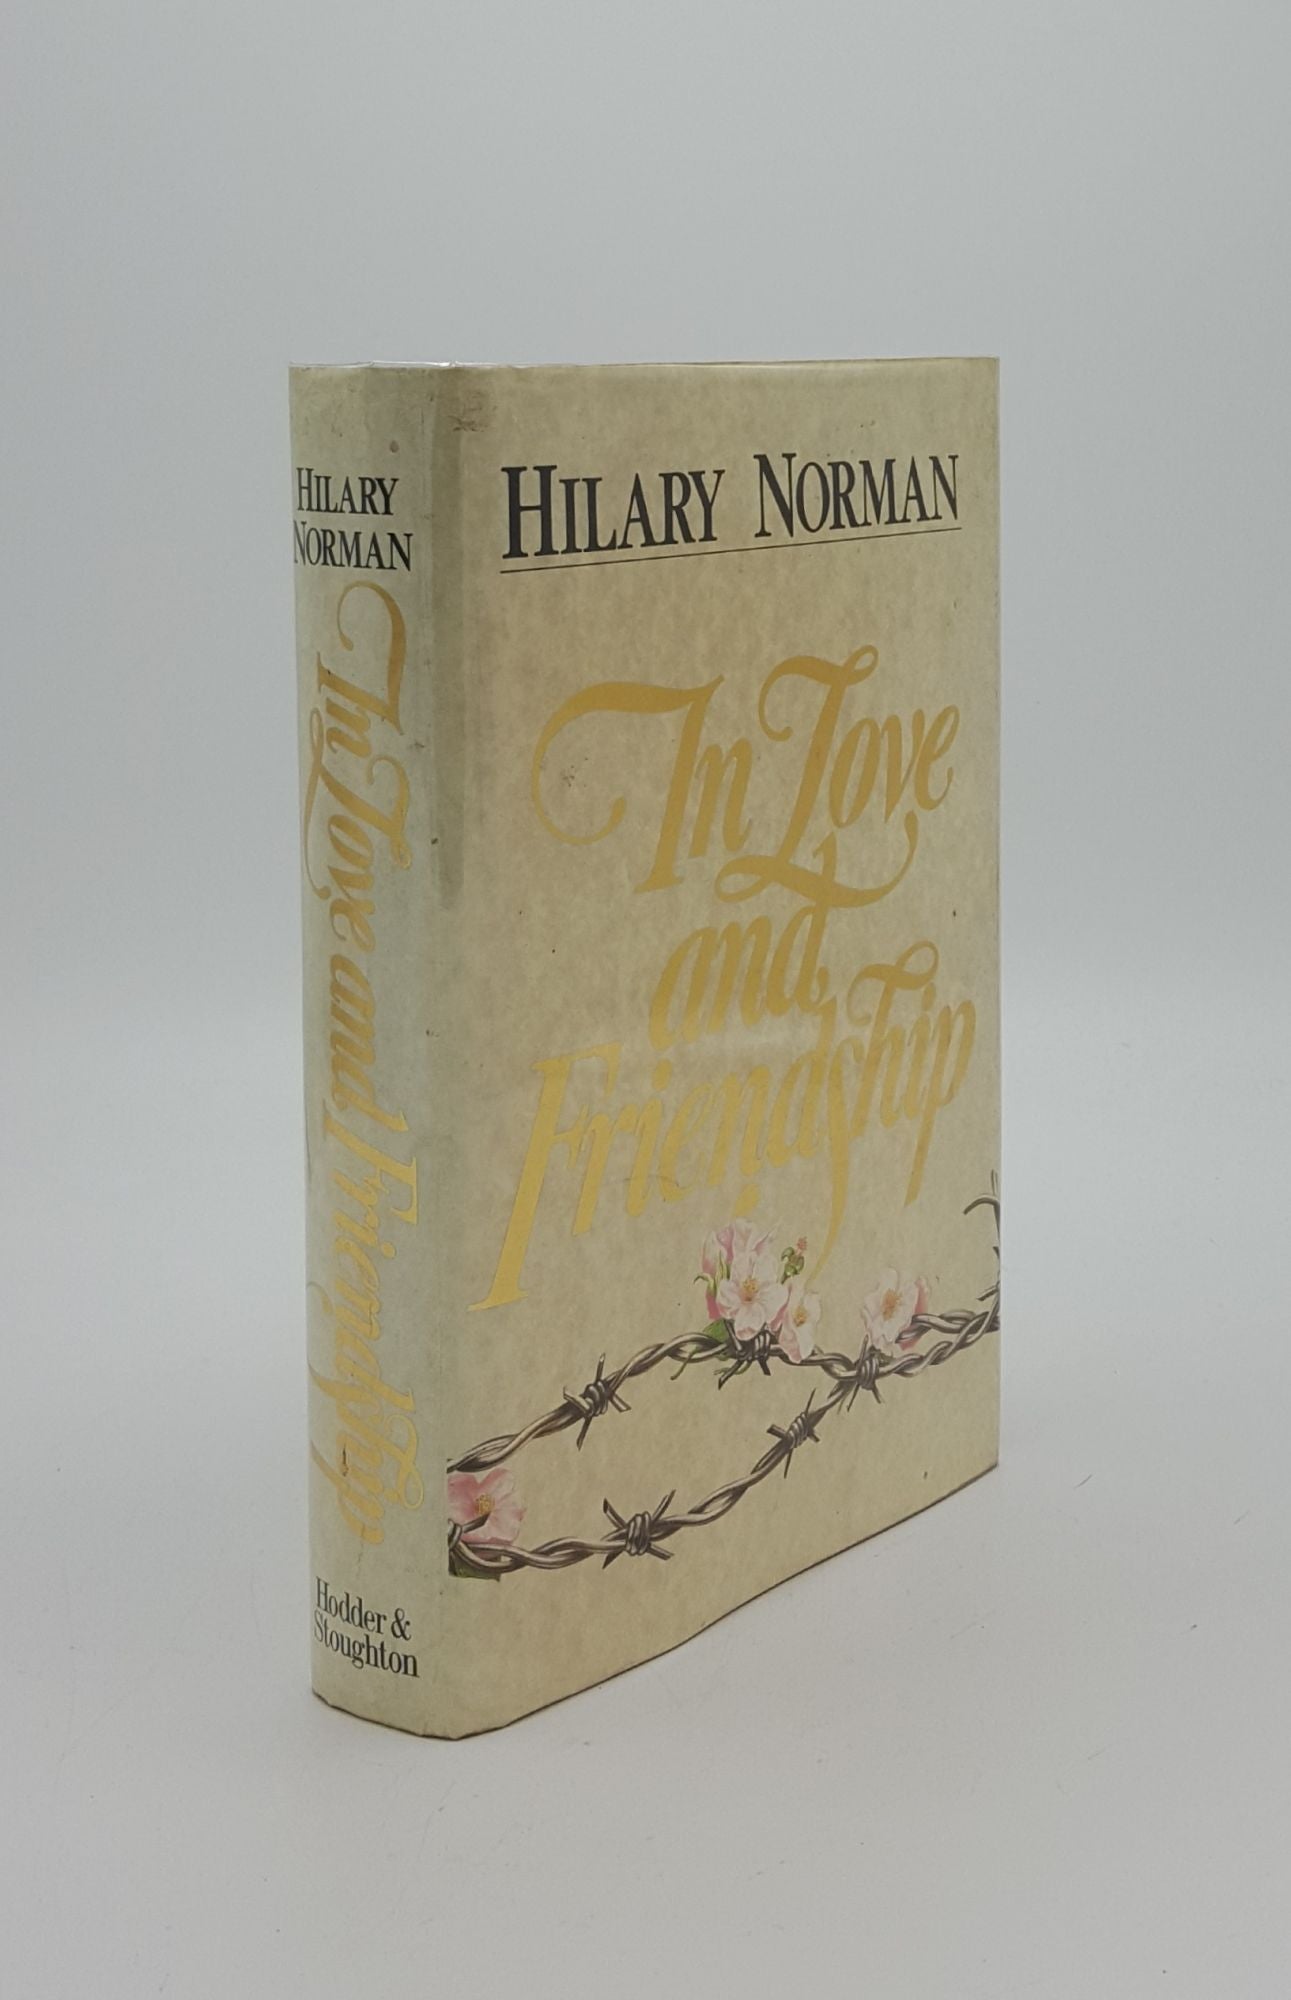 NORMAN Hilary - In Love and Friendship